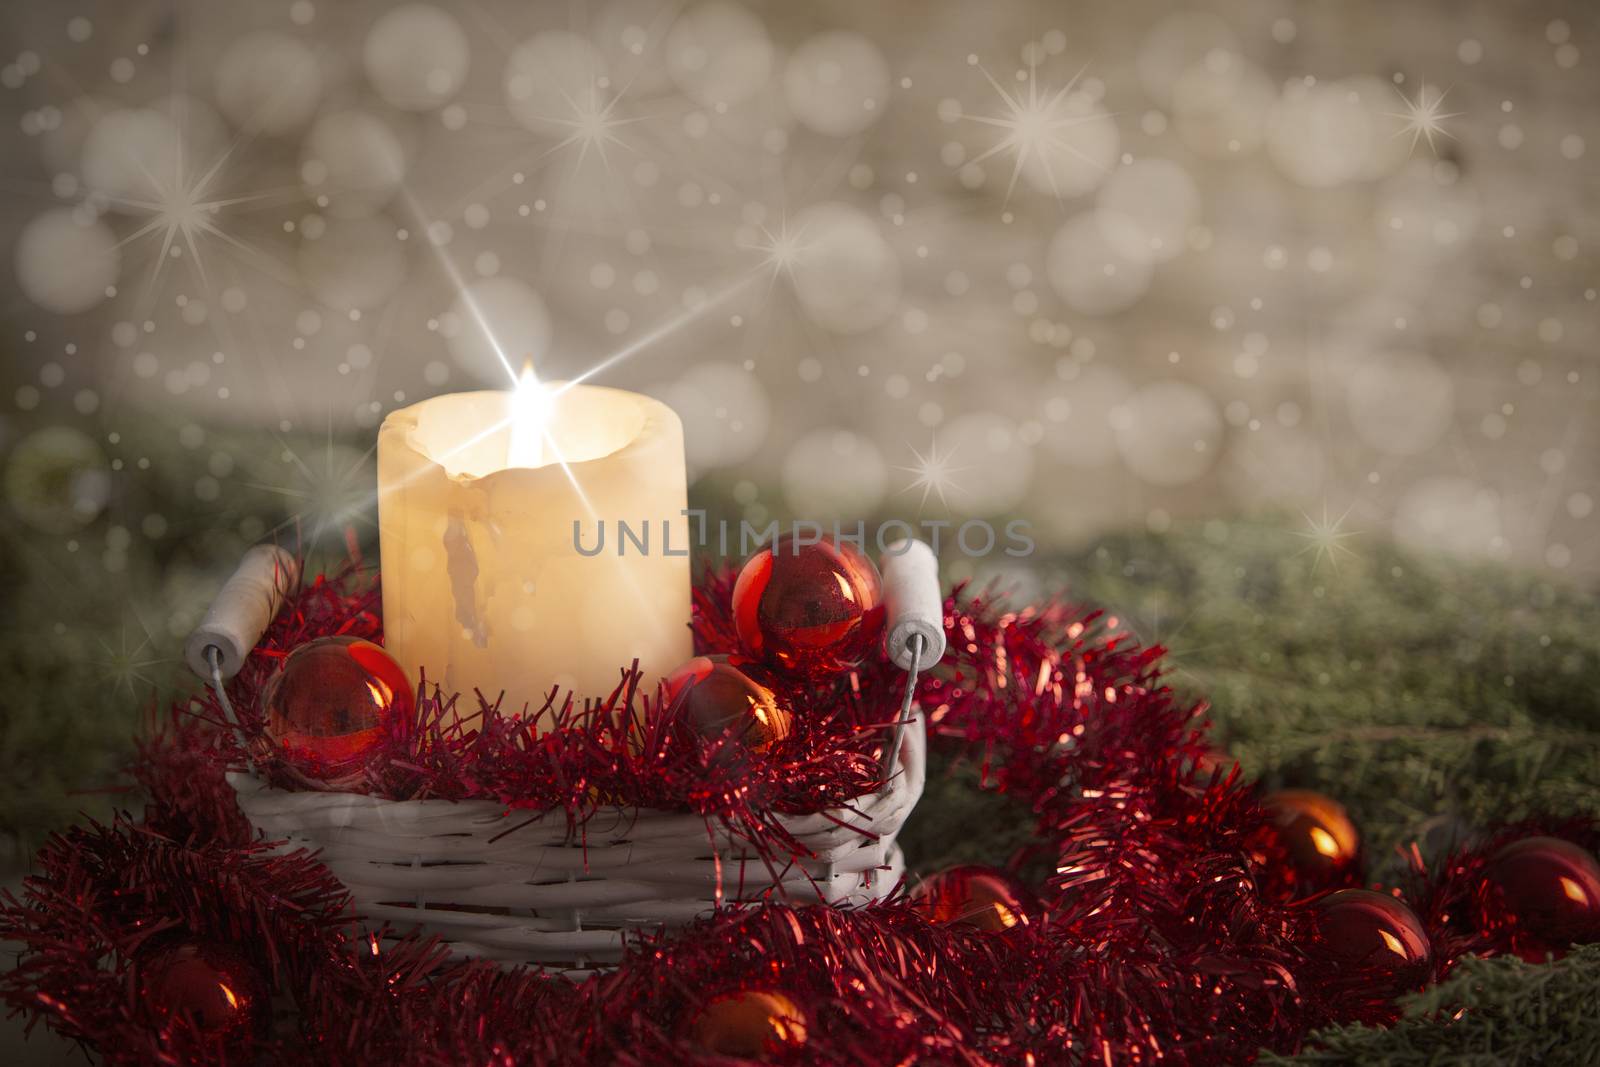 Christmas concept: a lit candle lit with cross screen stars effect in a white shabby basket with red Christmas baubles, red decorative wreath, natural pine branch, wooden background and snow effect